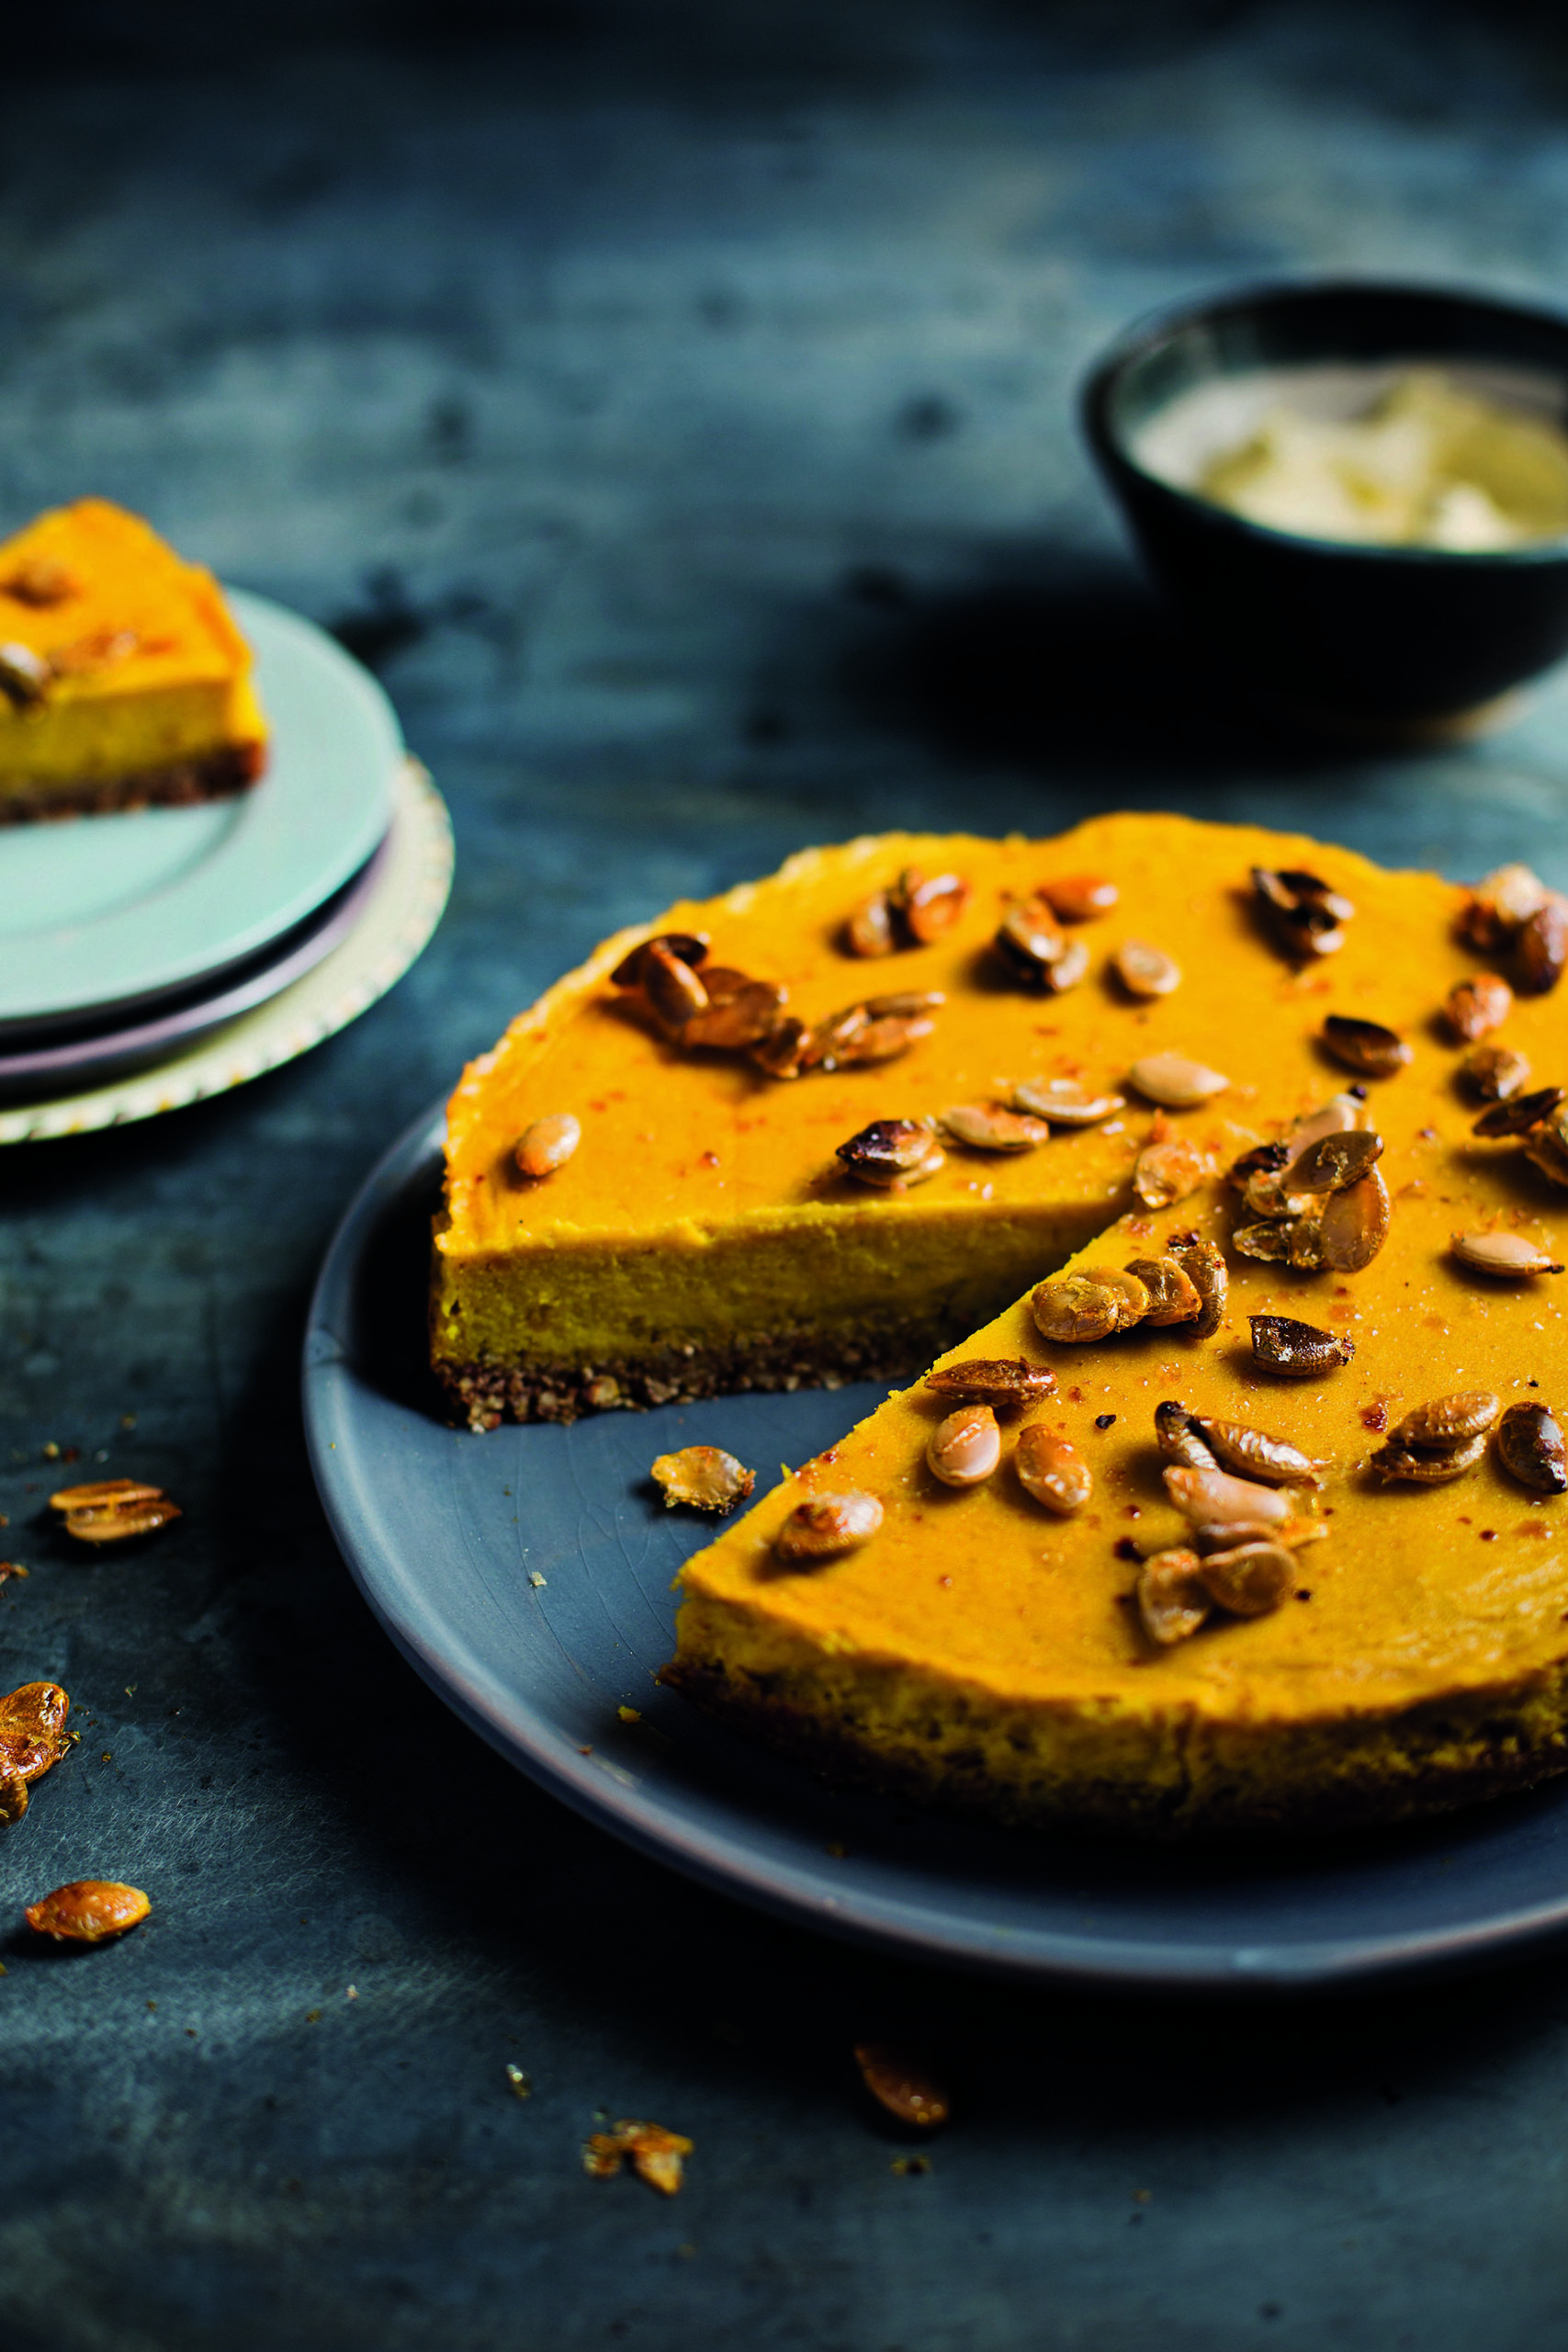 These pumpkin desserts are autumnal delights